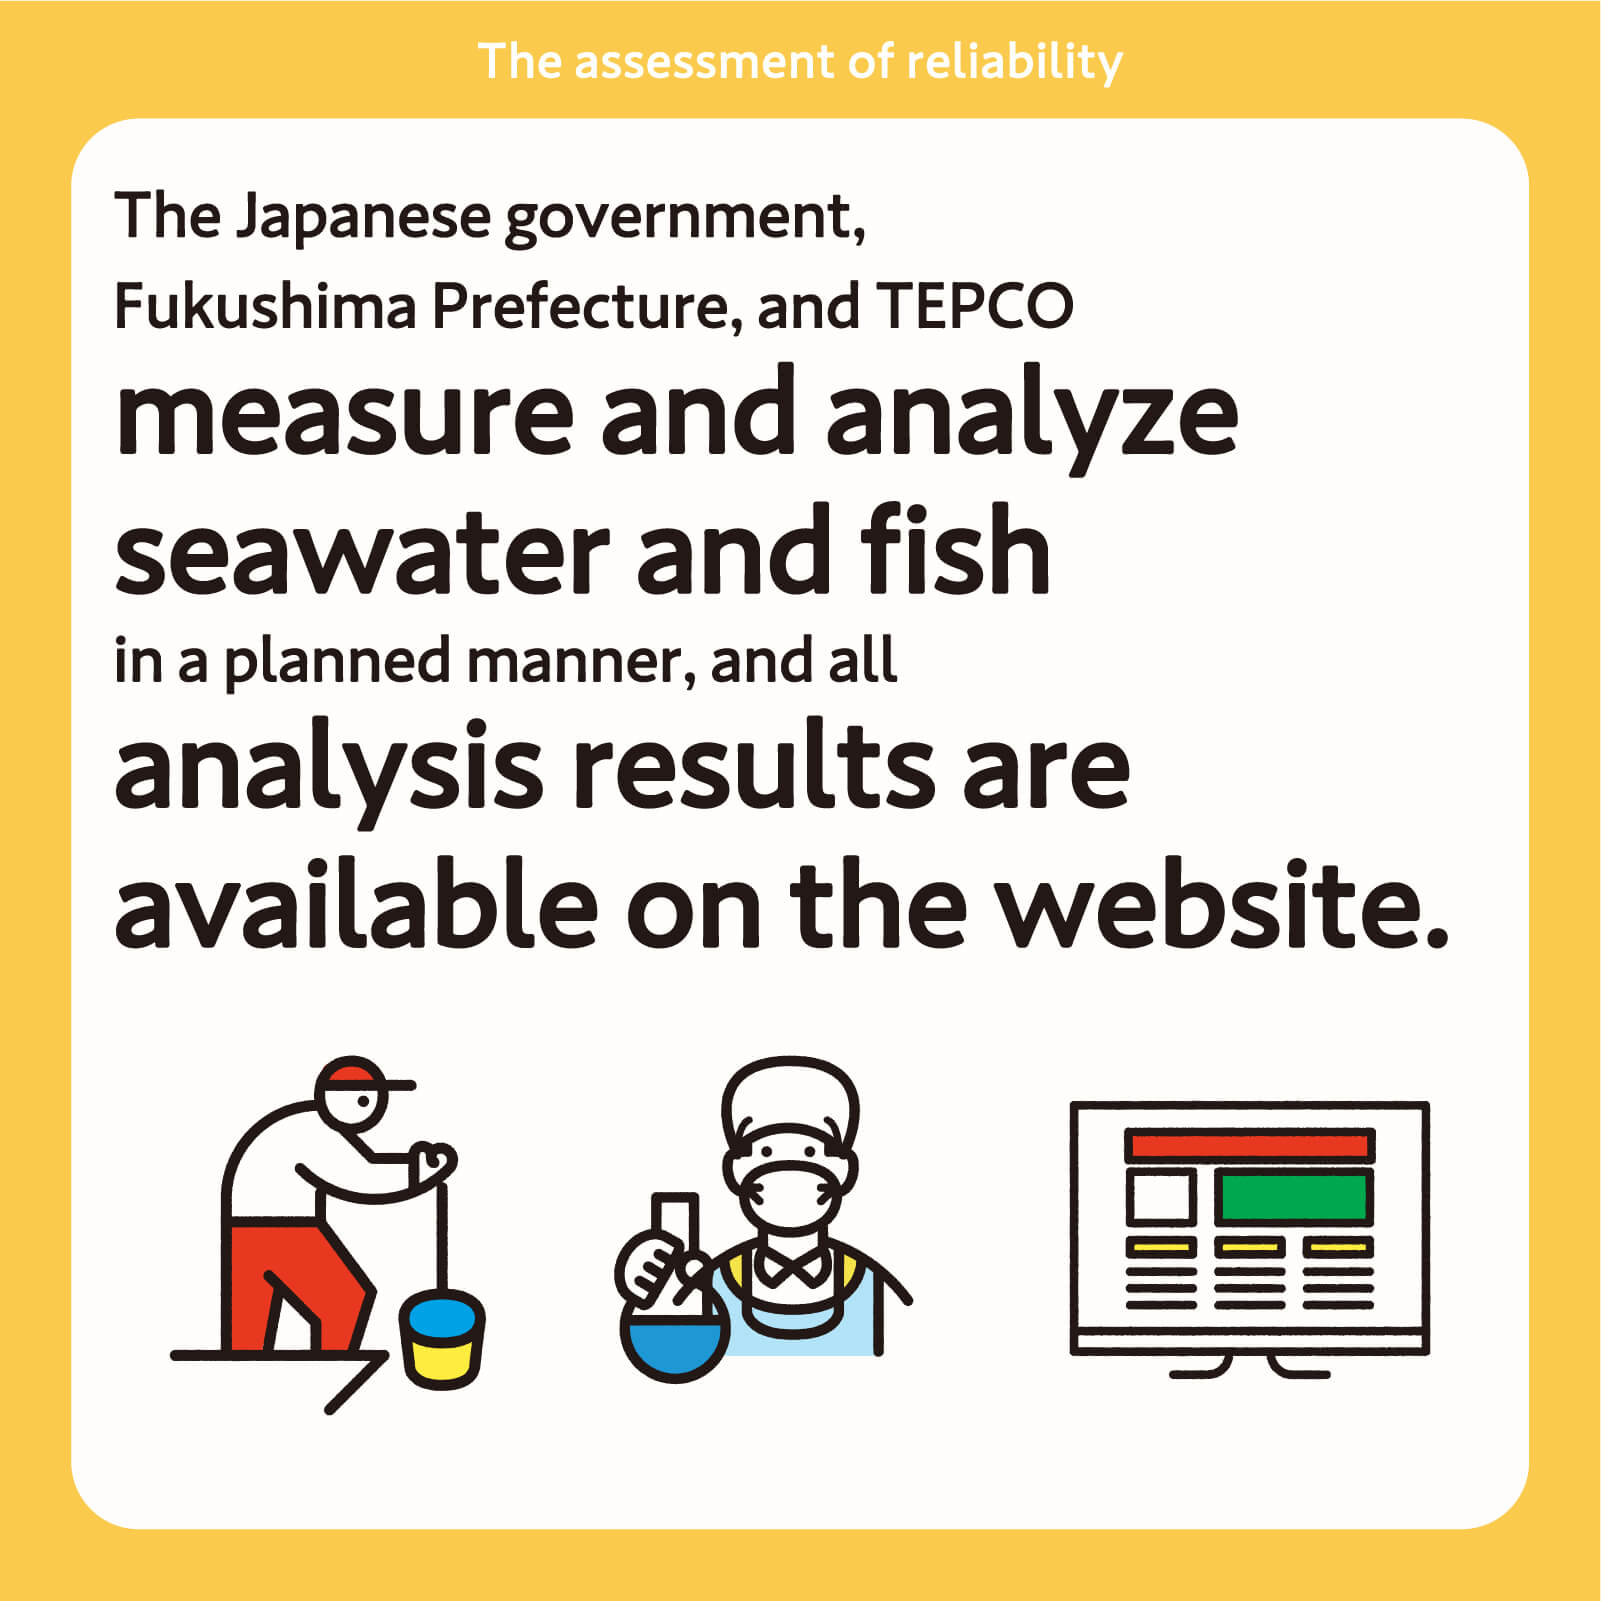 The Japanese government, Fukushima Prefecture, and TEPCO measure and analyze seawater and fish in a planned manner, and all analysis results are 
              available on the website.